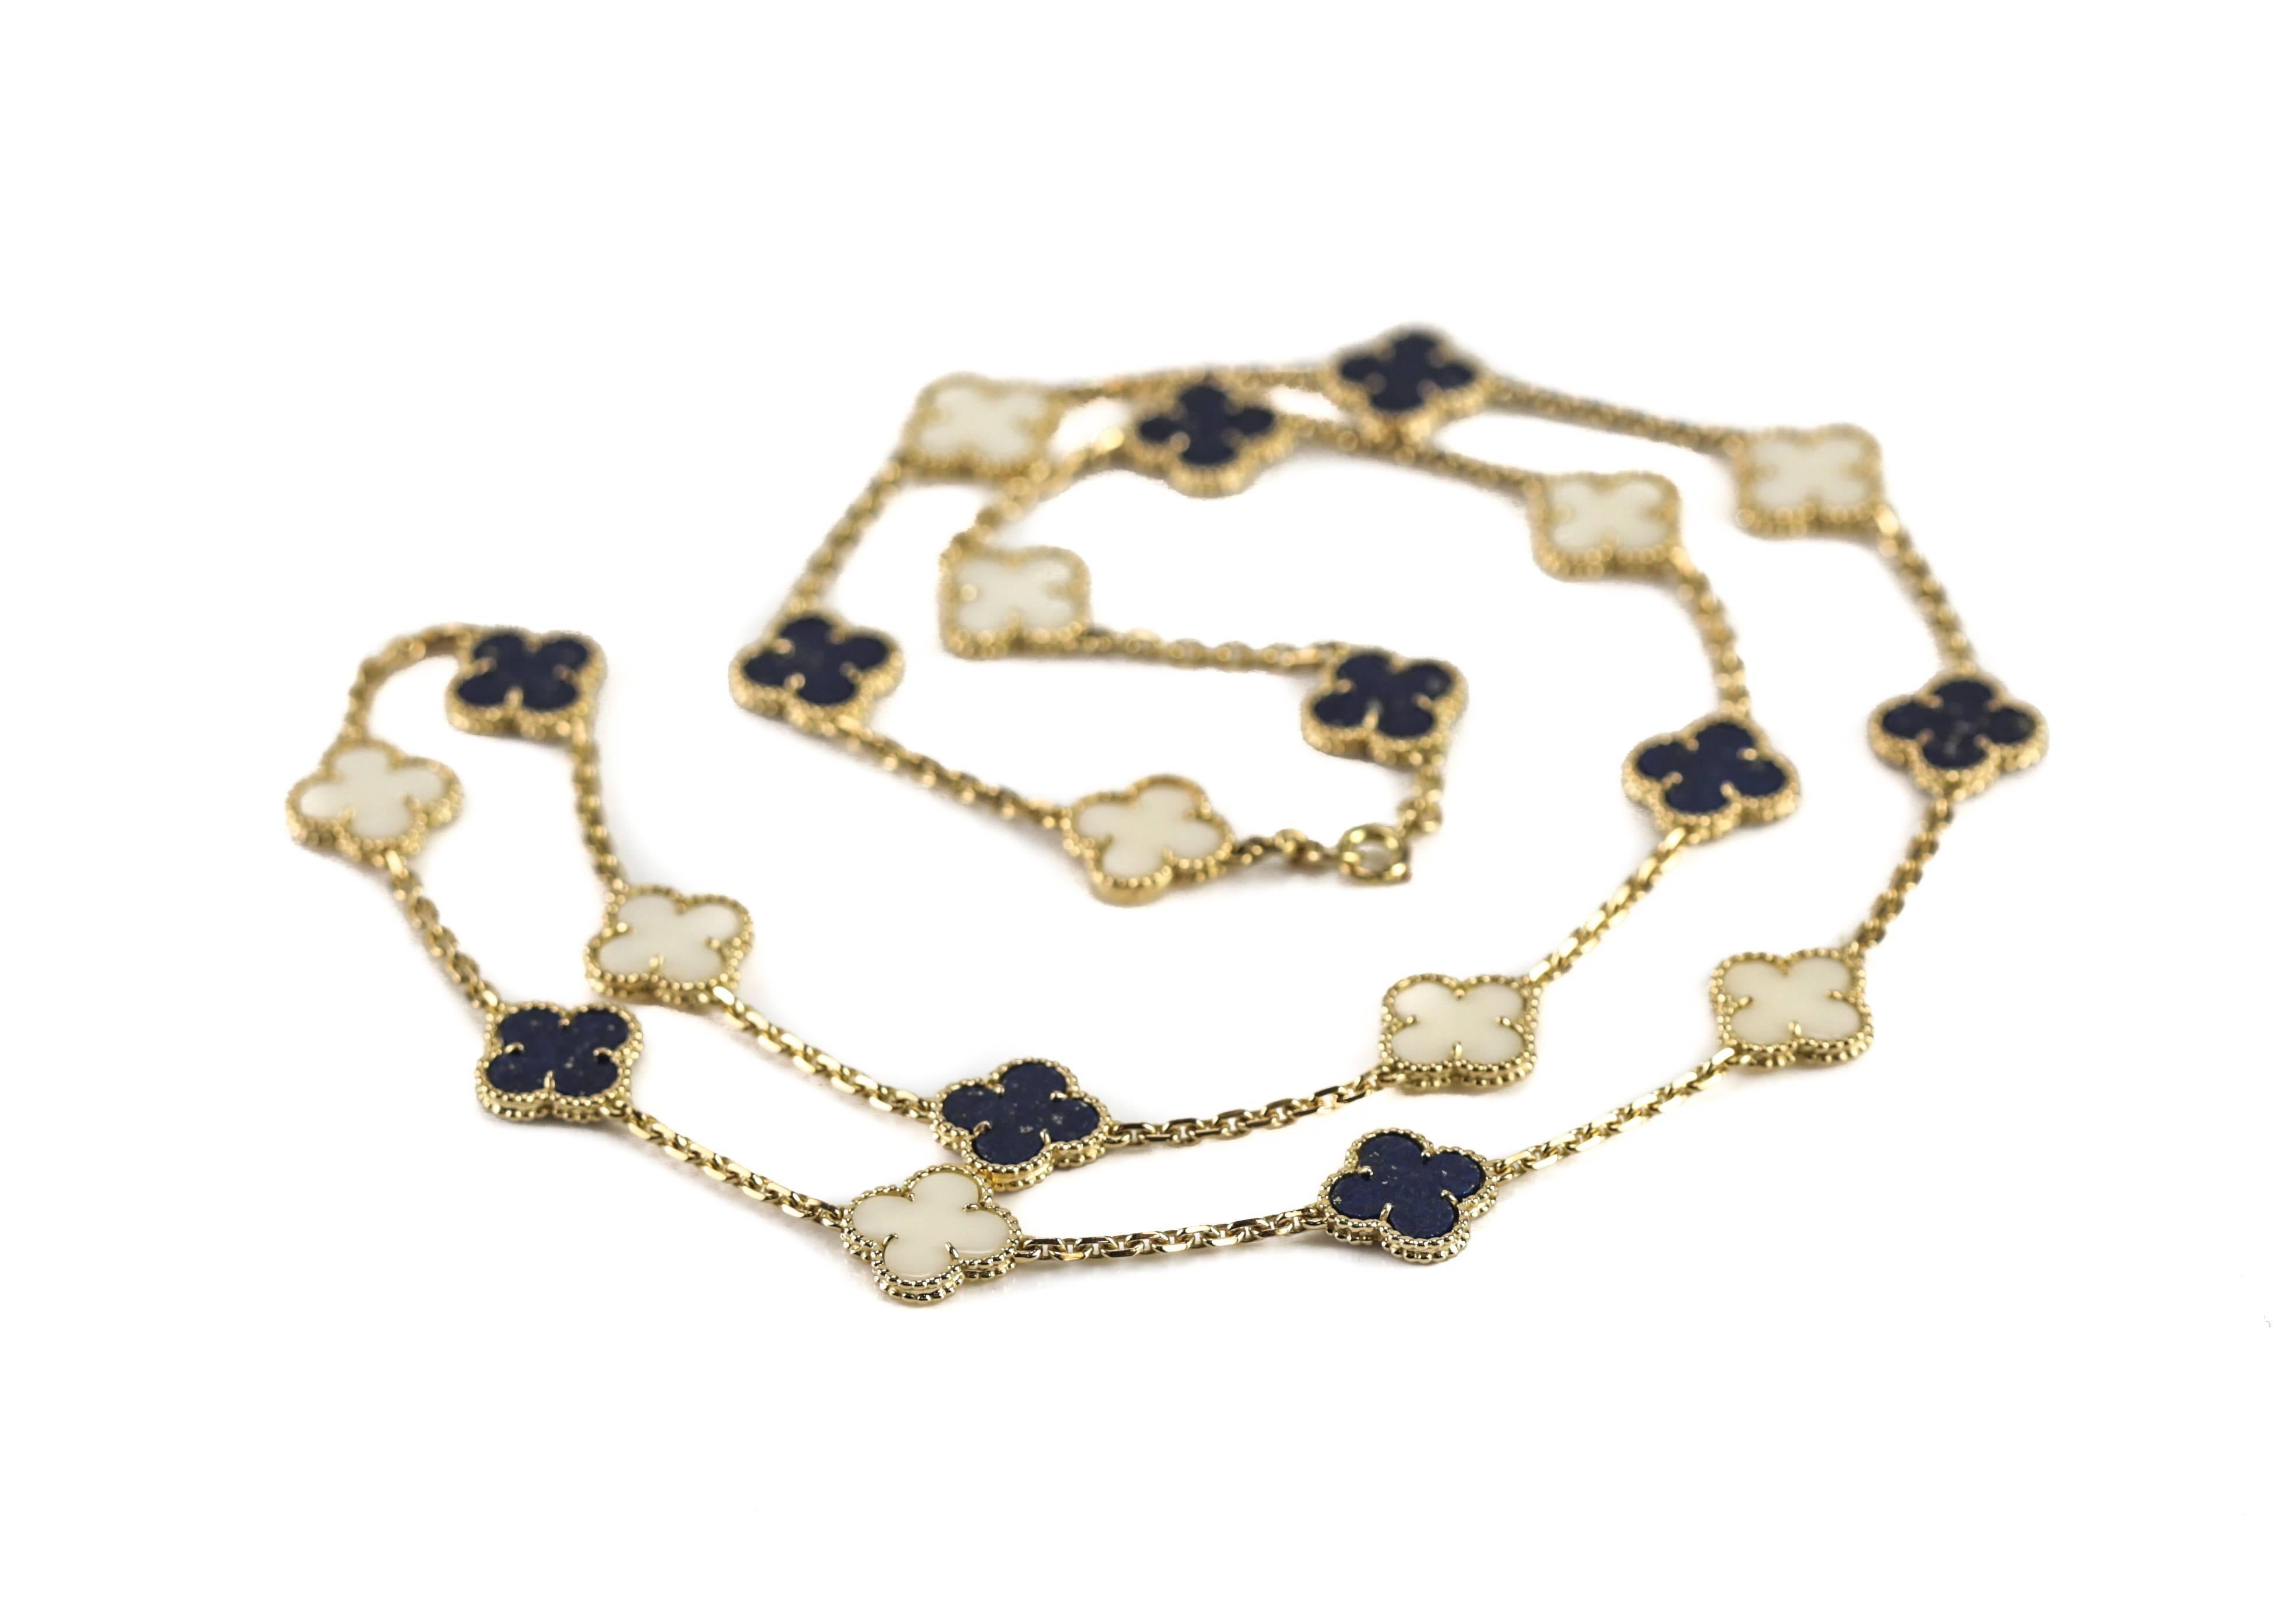 A vintage necklace by Van Cleef & Arpels from the Alhambra collection consisting of ten alternating clover motifs of white coral and lapis lazuli. Necklaces such as this are issued every once in a while as part of a limited edition series, it is our